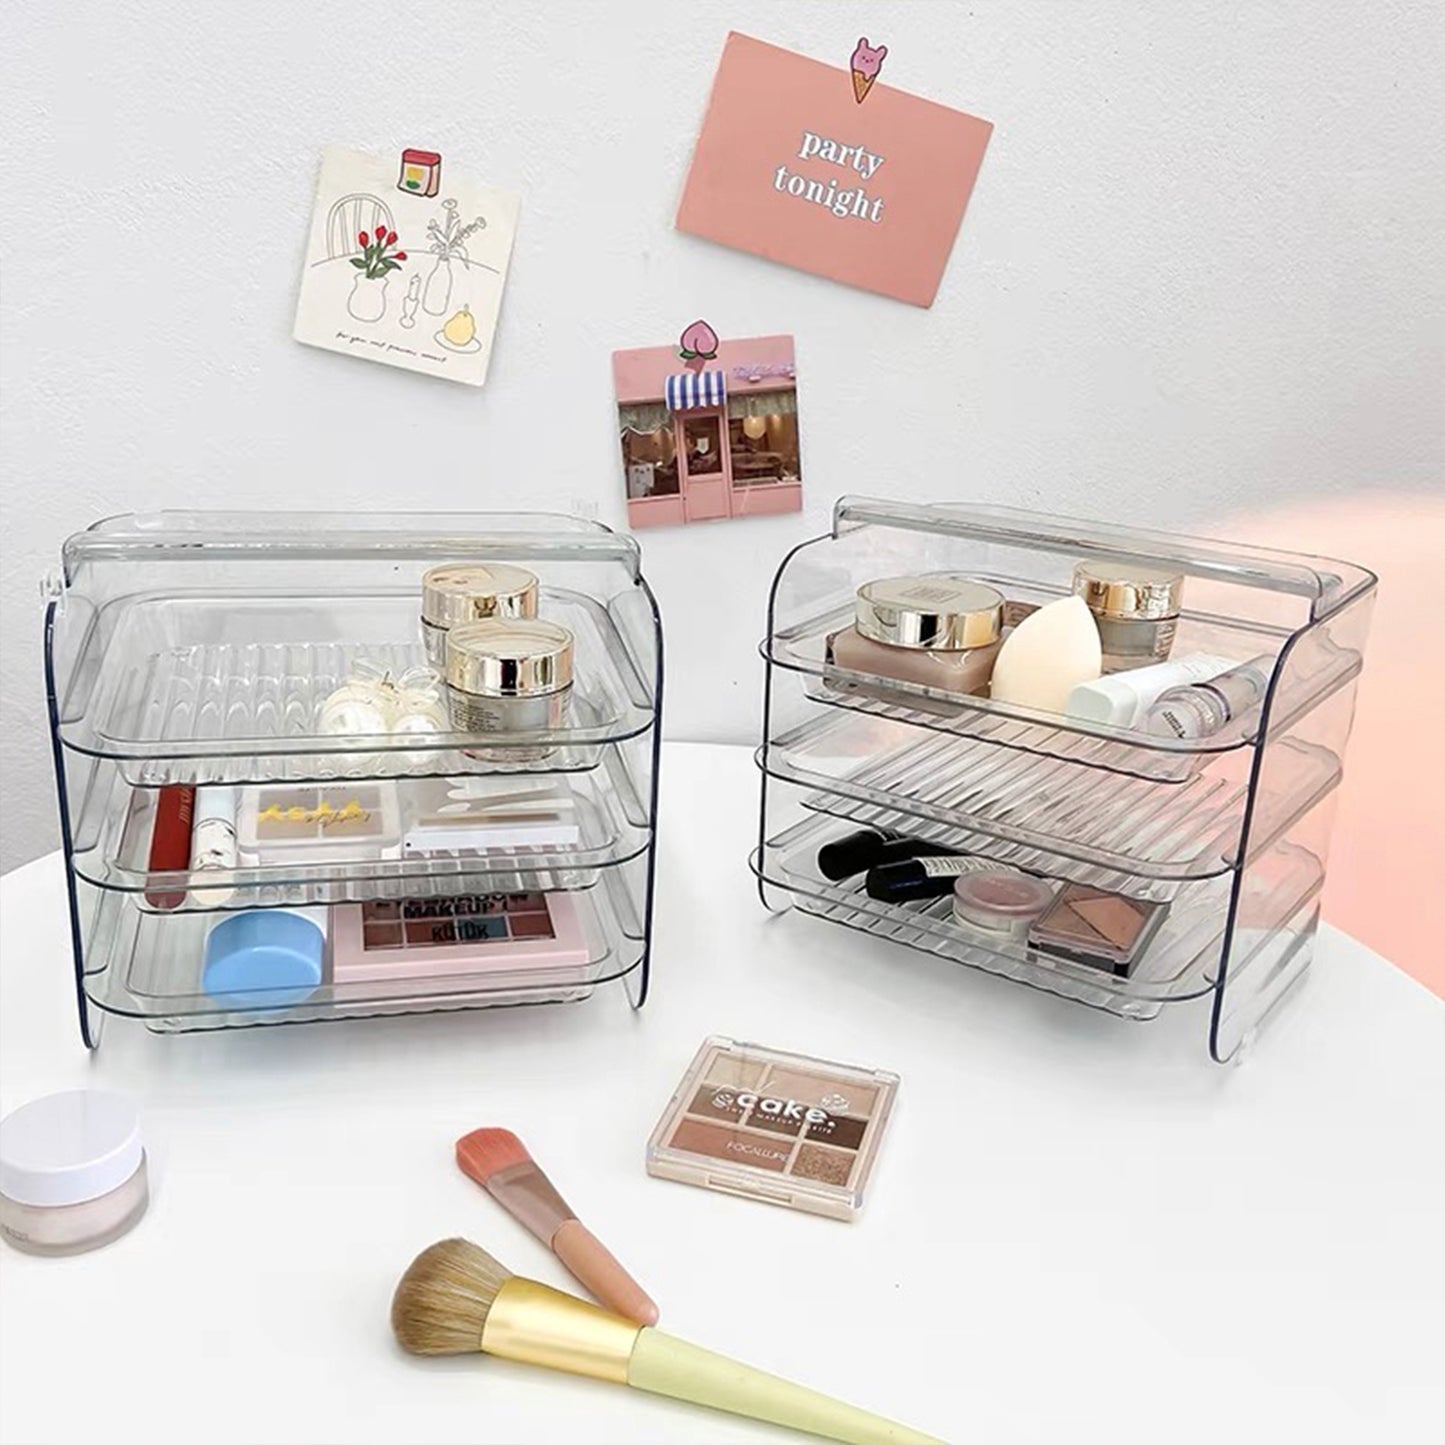 Makeup Jewelry Makeup Brushes Office Bathroom Counter Desk Organizer Cosmetic Storage Display Case